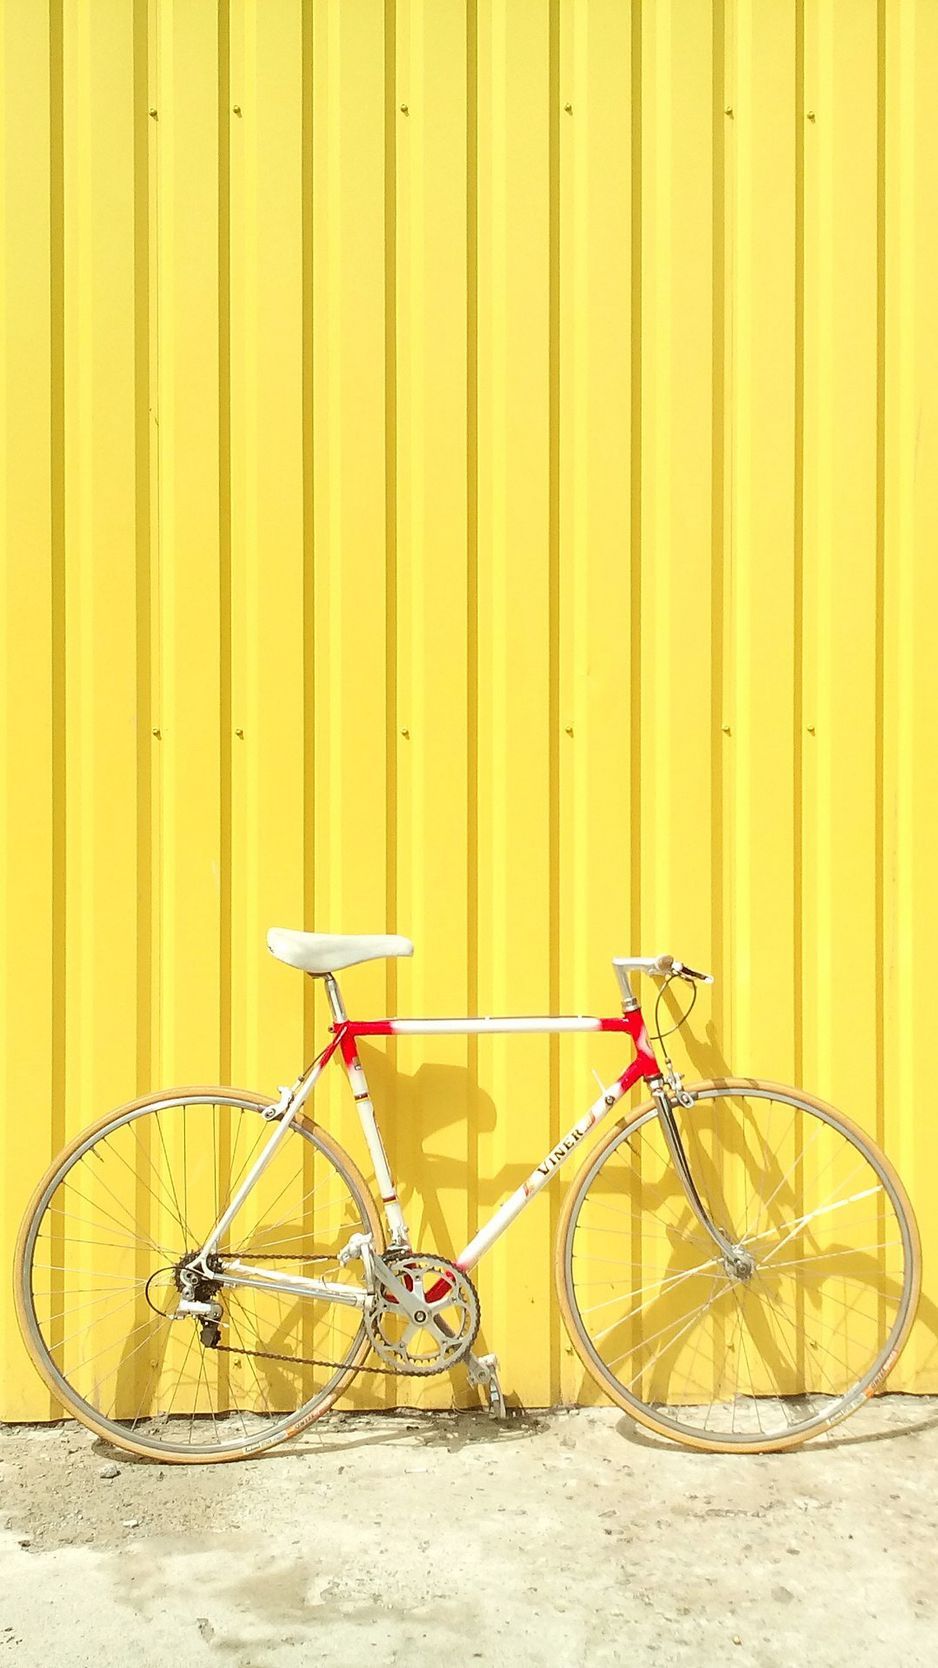 Download wallpaper 938x1668 bicycle, wall, yellow, summer iphone 8